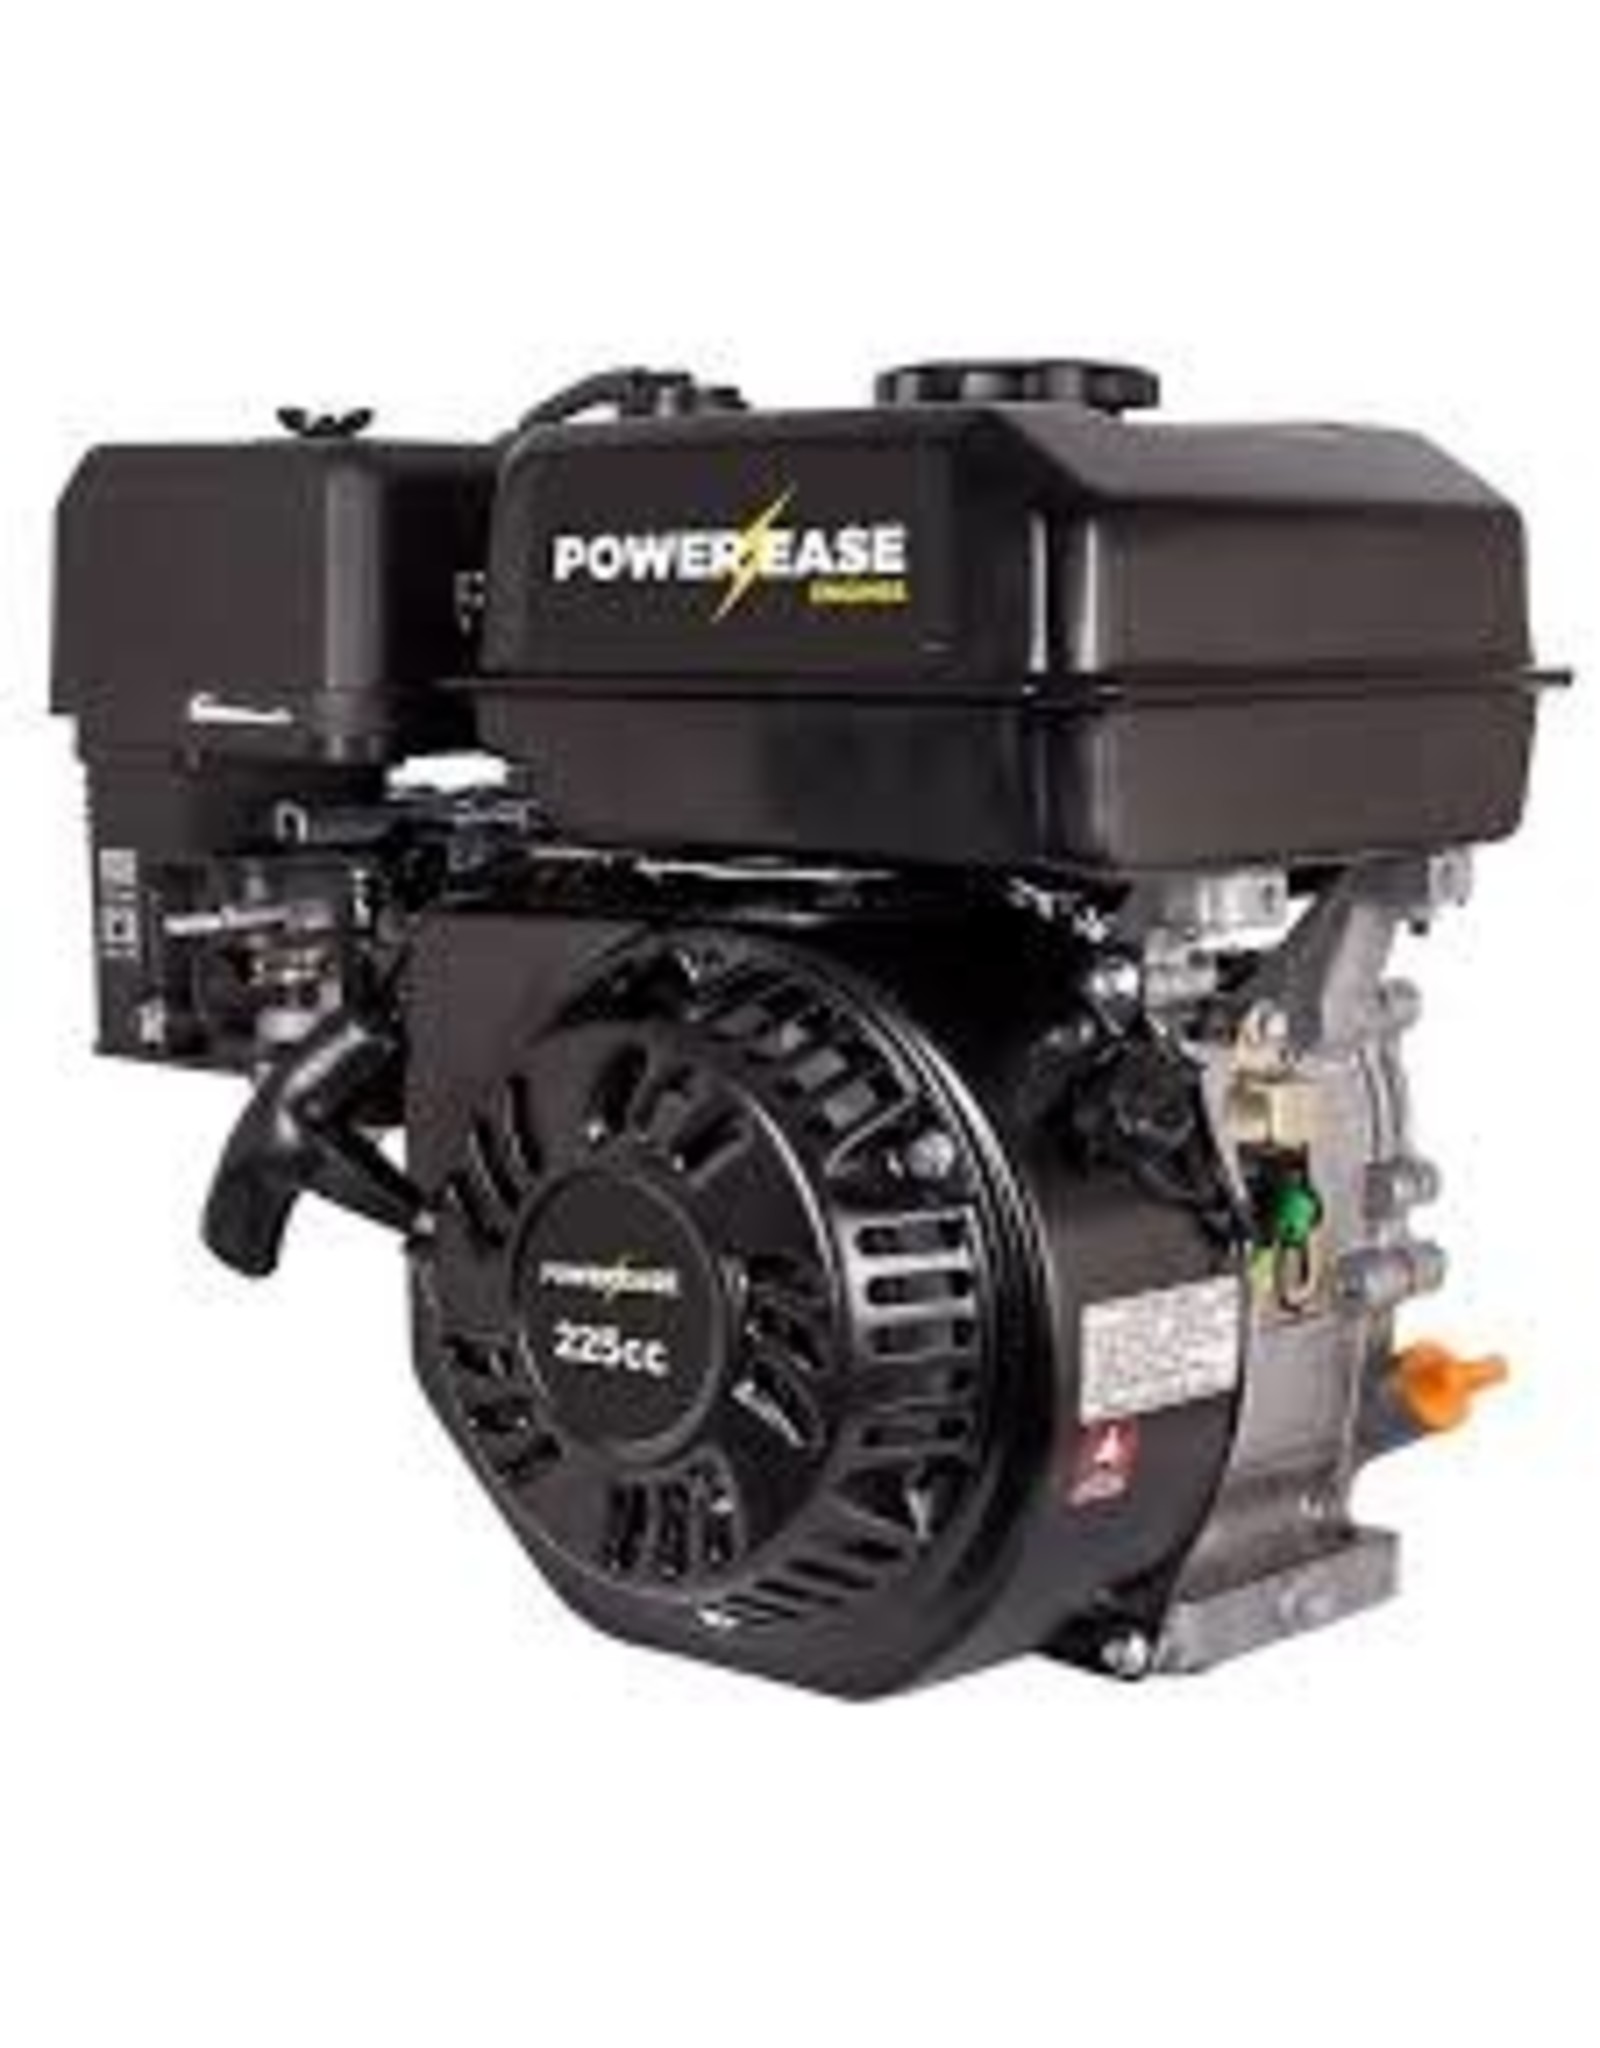 BE 85.570.070 Power/Ease 225CC Engine